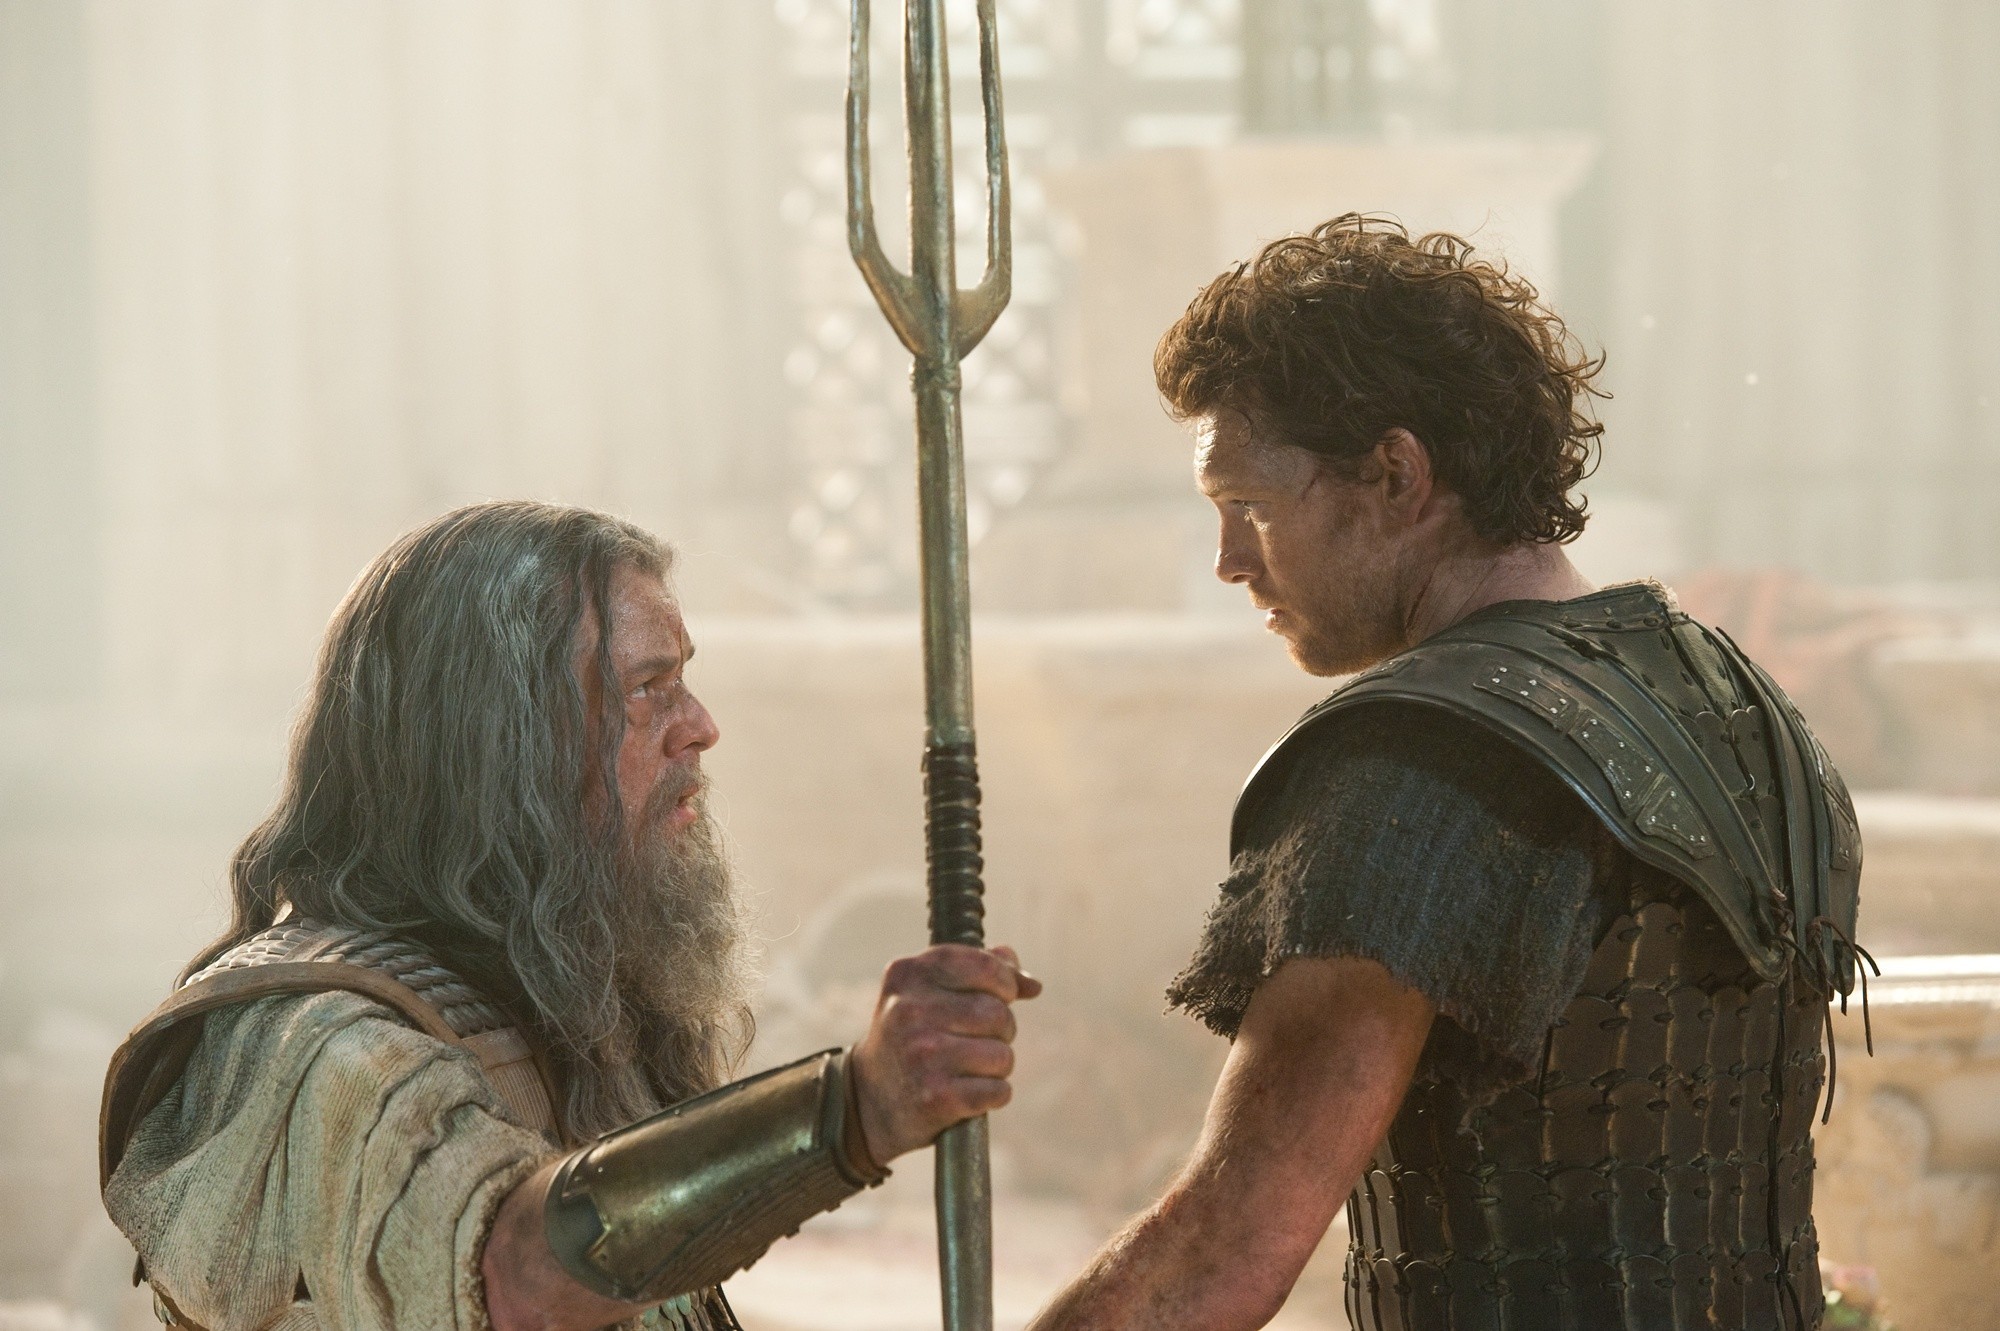 Danny Huston stars as Poseidon and Sam Worthington stars as Perseus in Warner Bros. Pictures' Wrath of the Titans (2012)